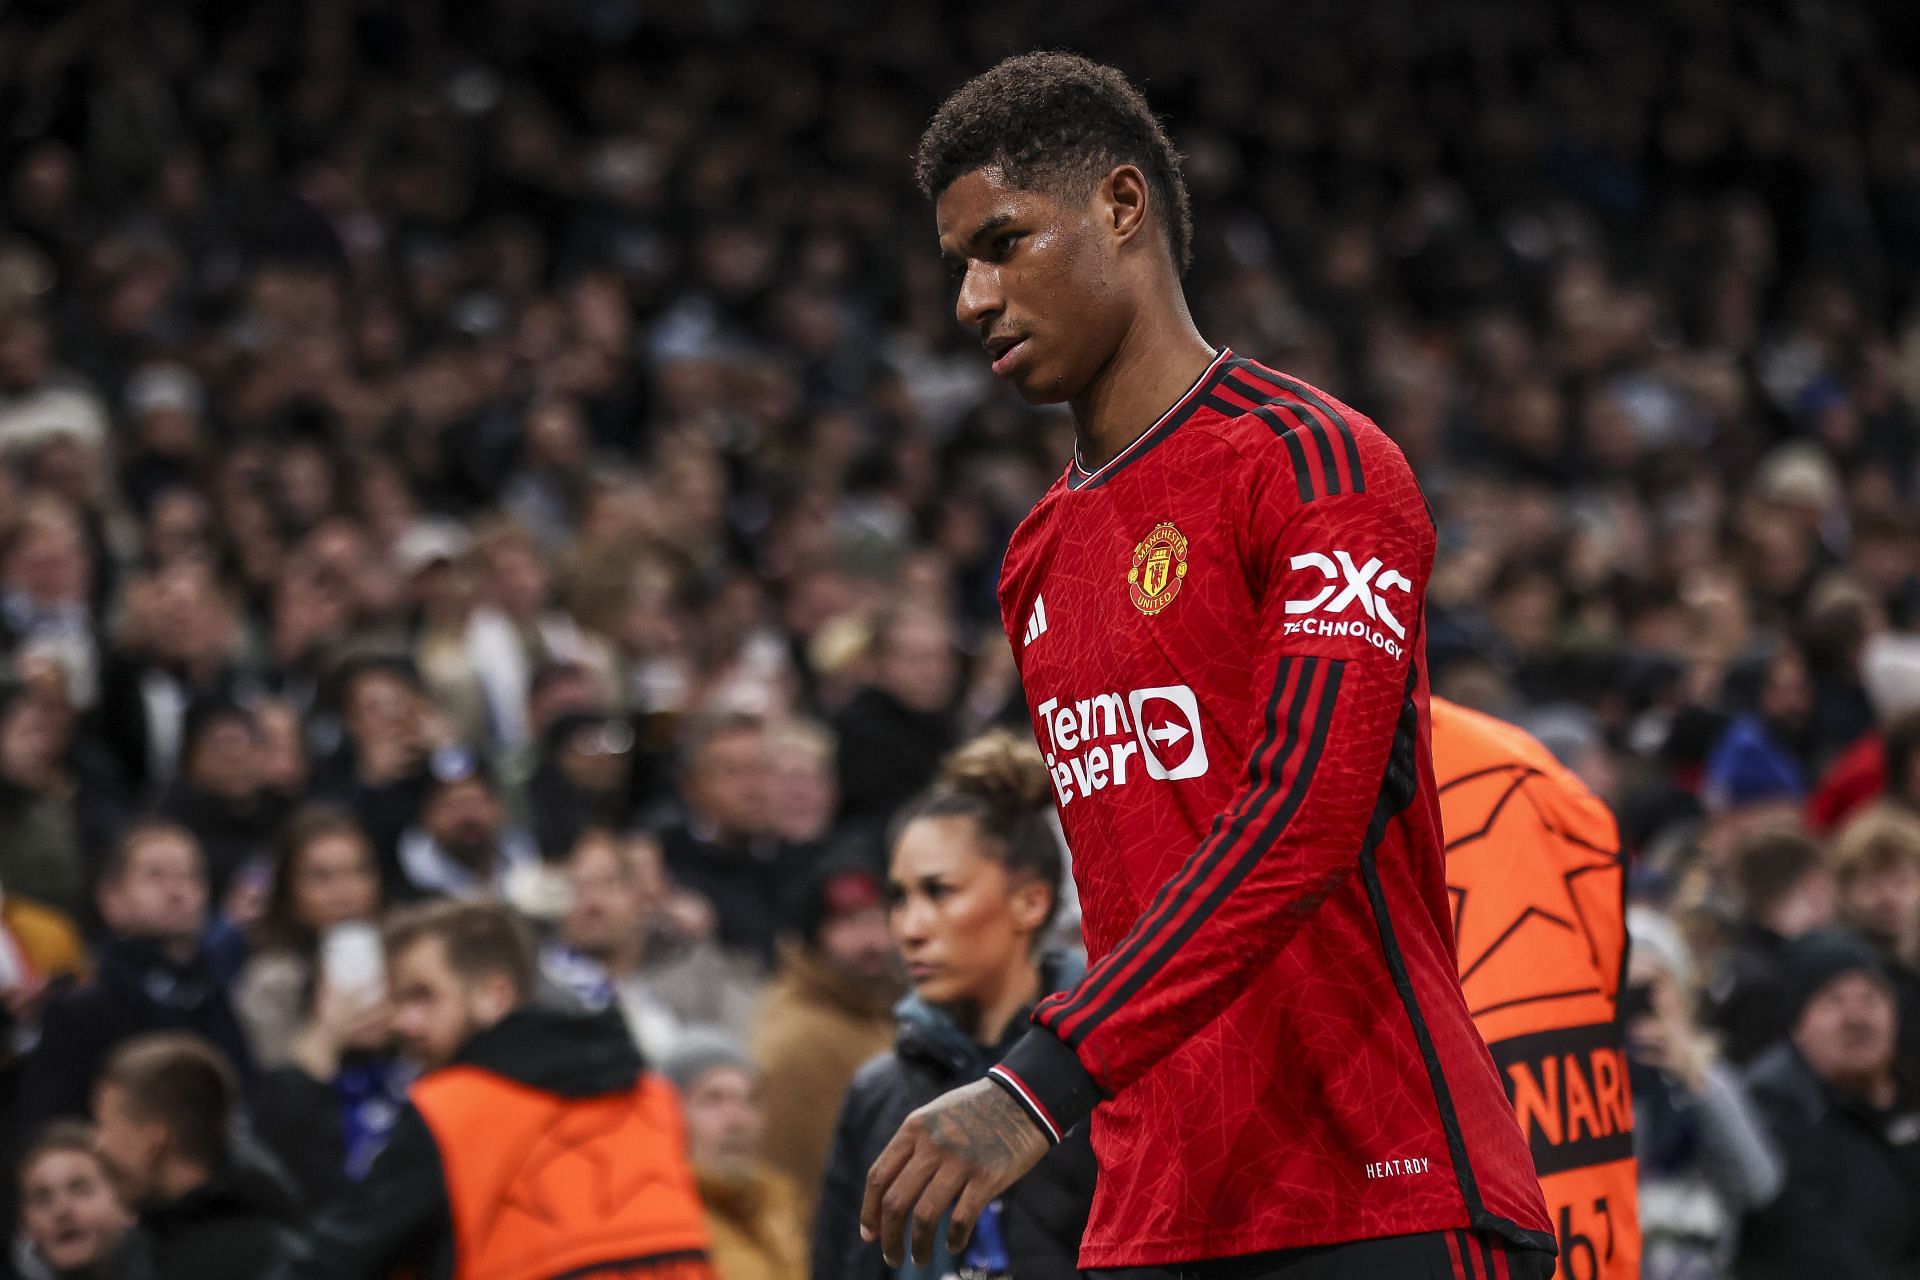 Marcus Rashford starts on the bench for the first time this season.